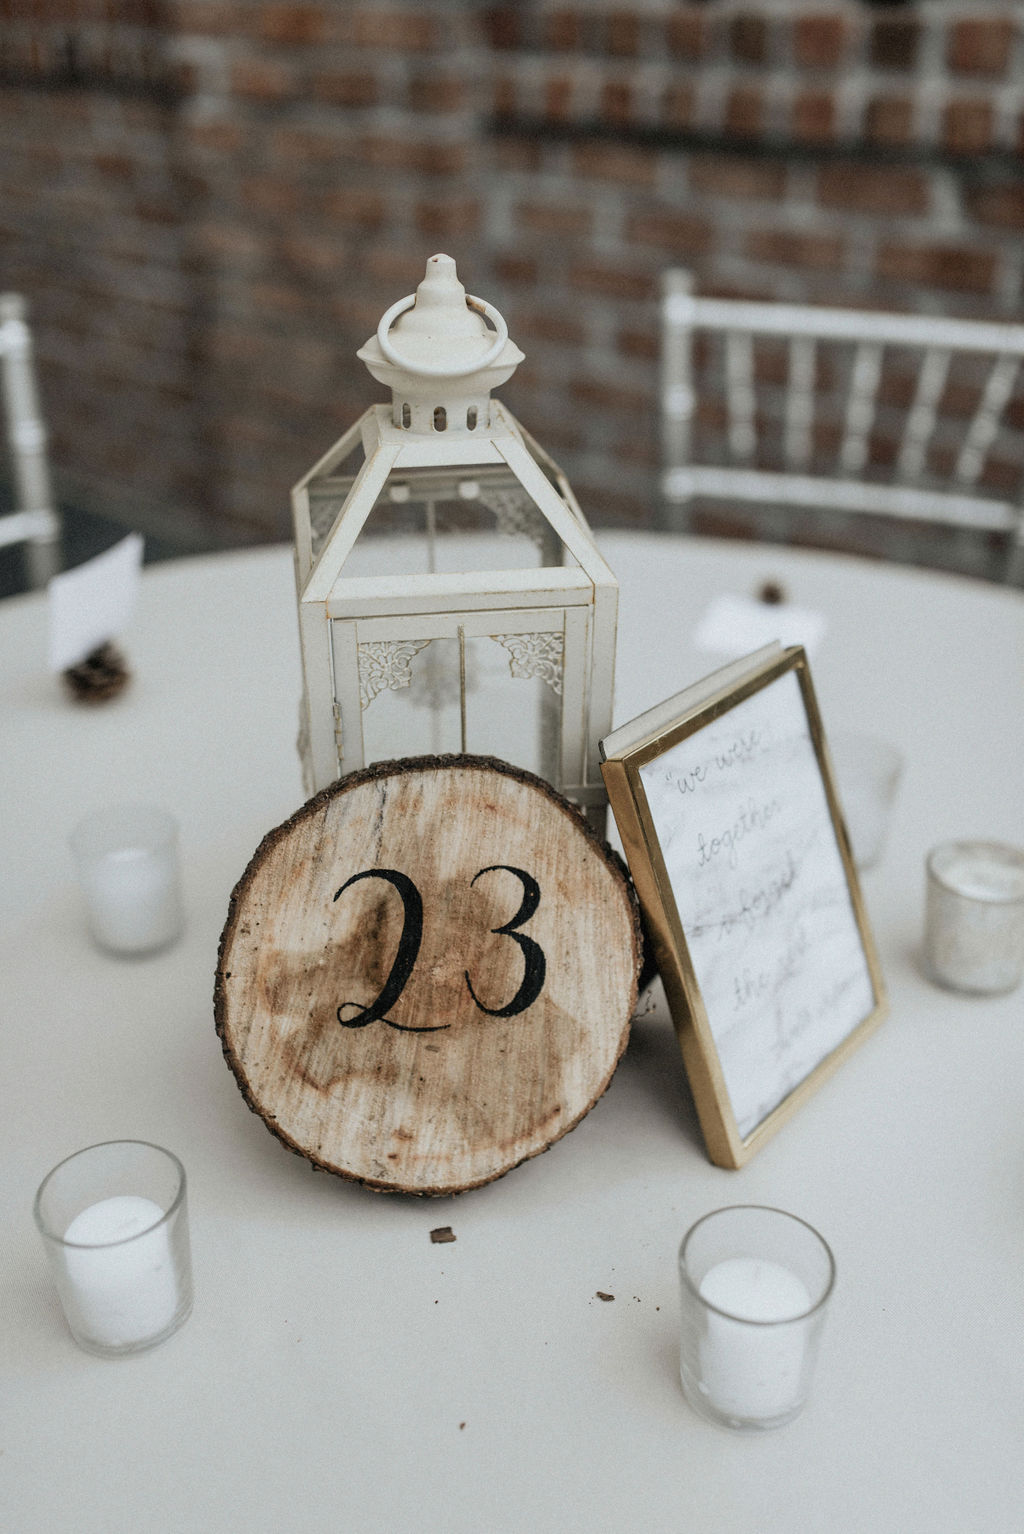 Lantern wedding centerpieces: Magical Winter Wedding by Meghan Melia Photography featured on Nashville Bride Guide!